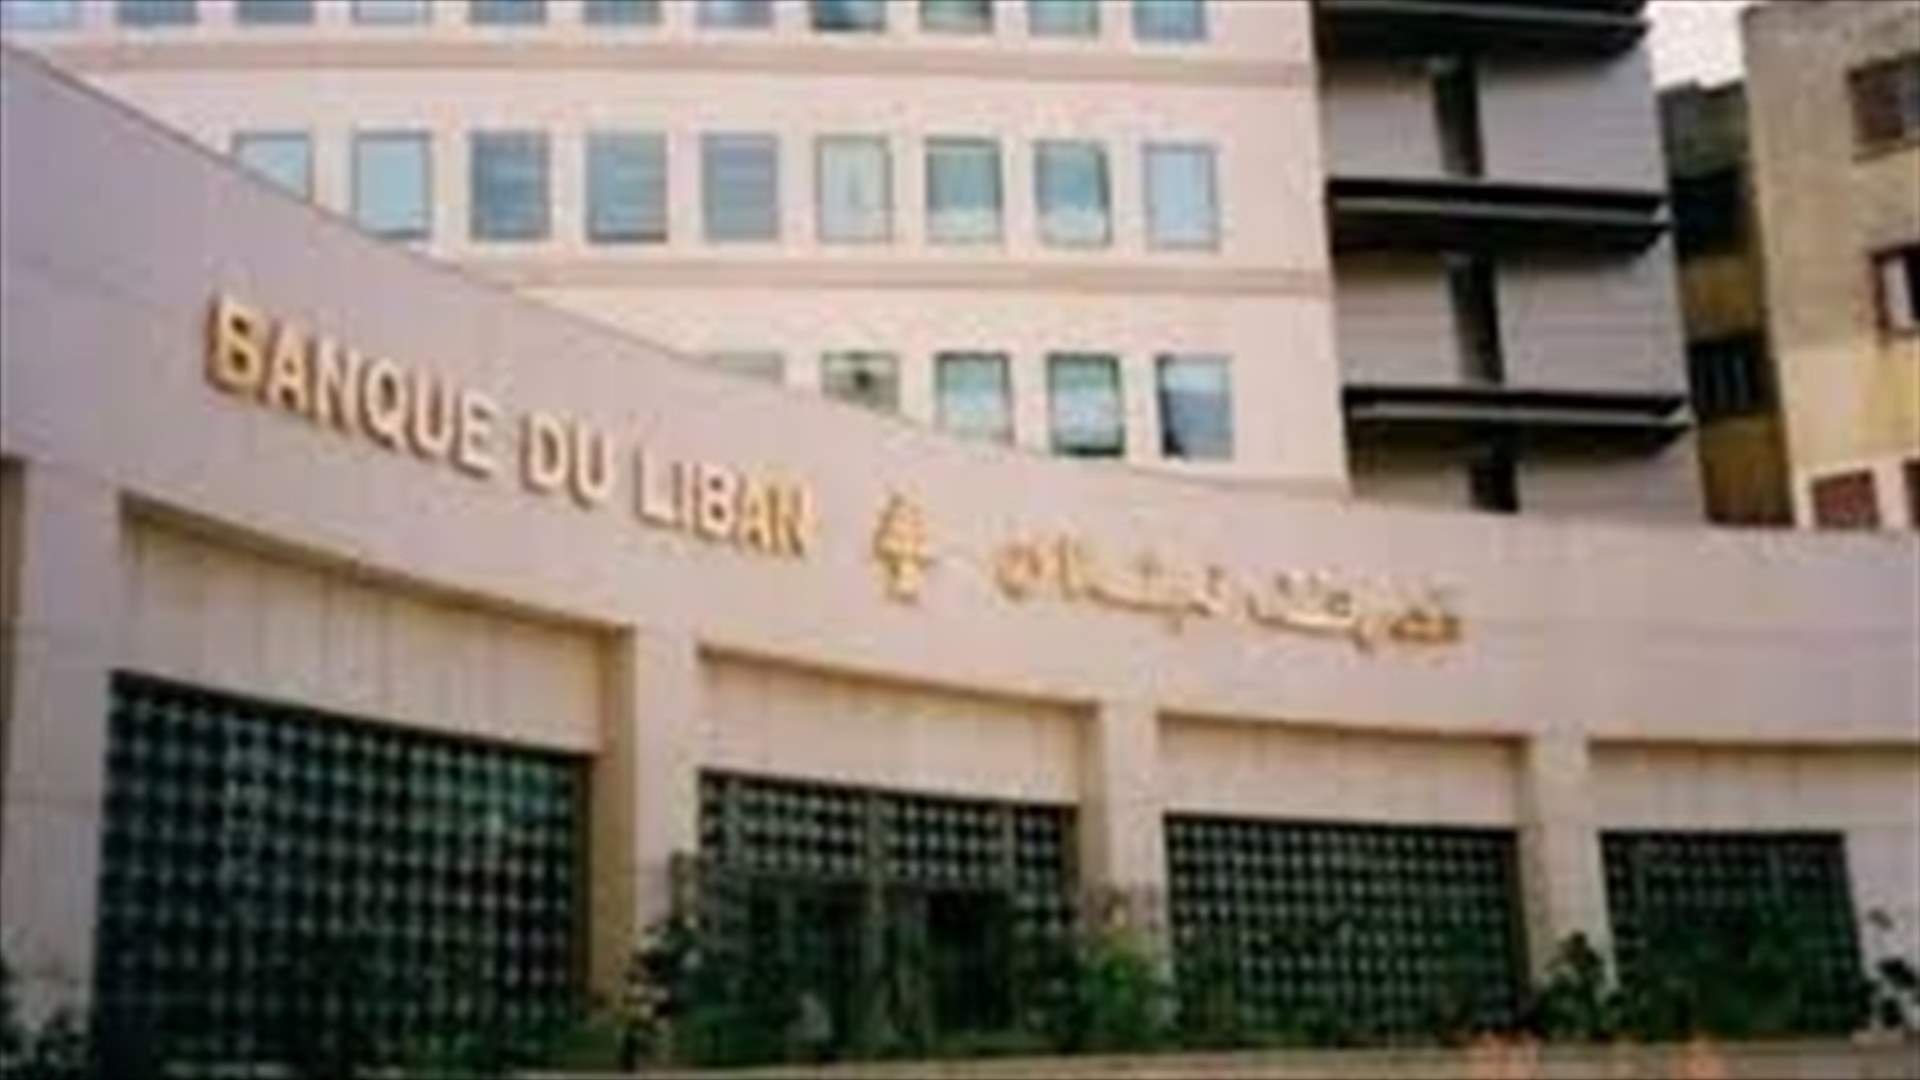 Central Bank refuses to provide Alvarez & Marsal with information-Lebanese official to The Daily Star